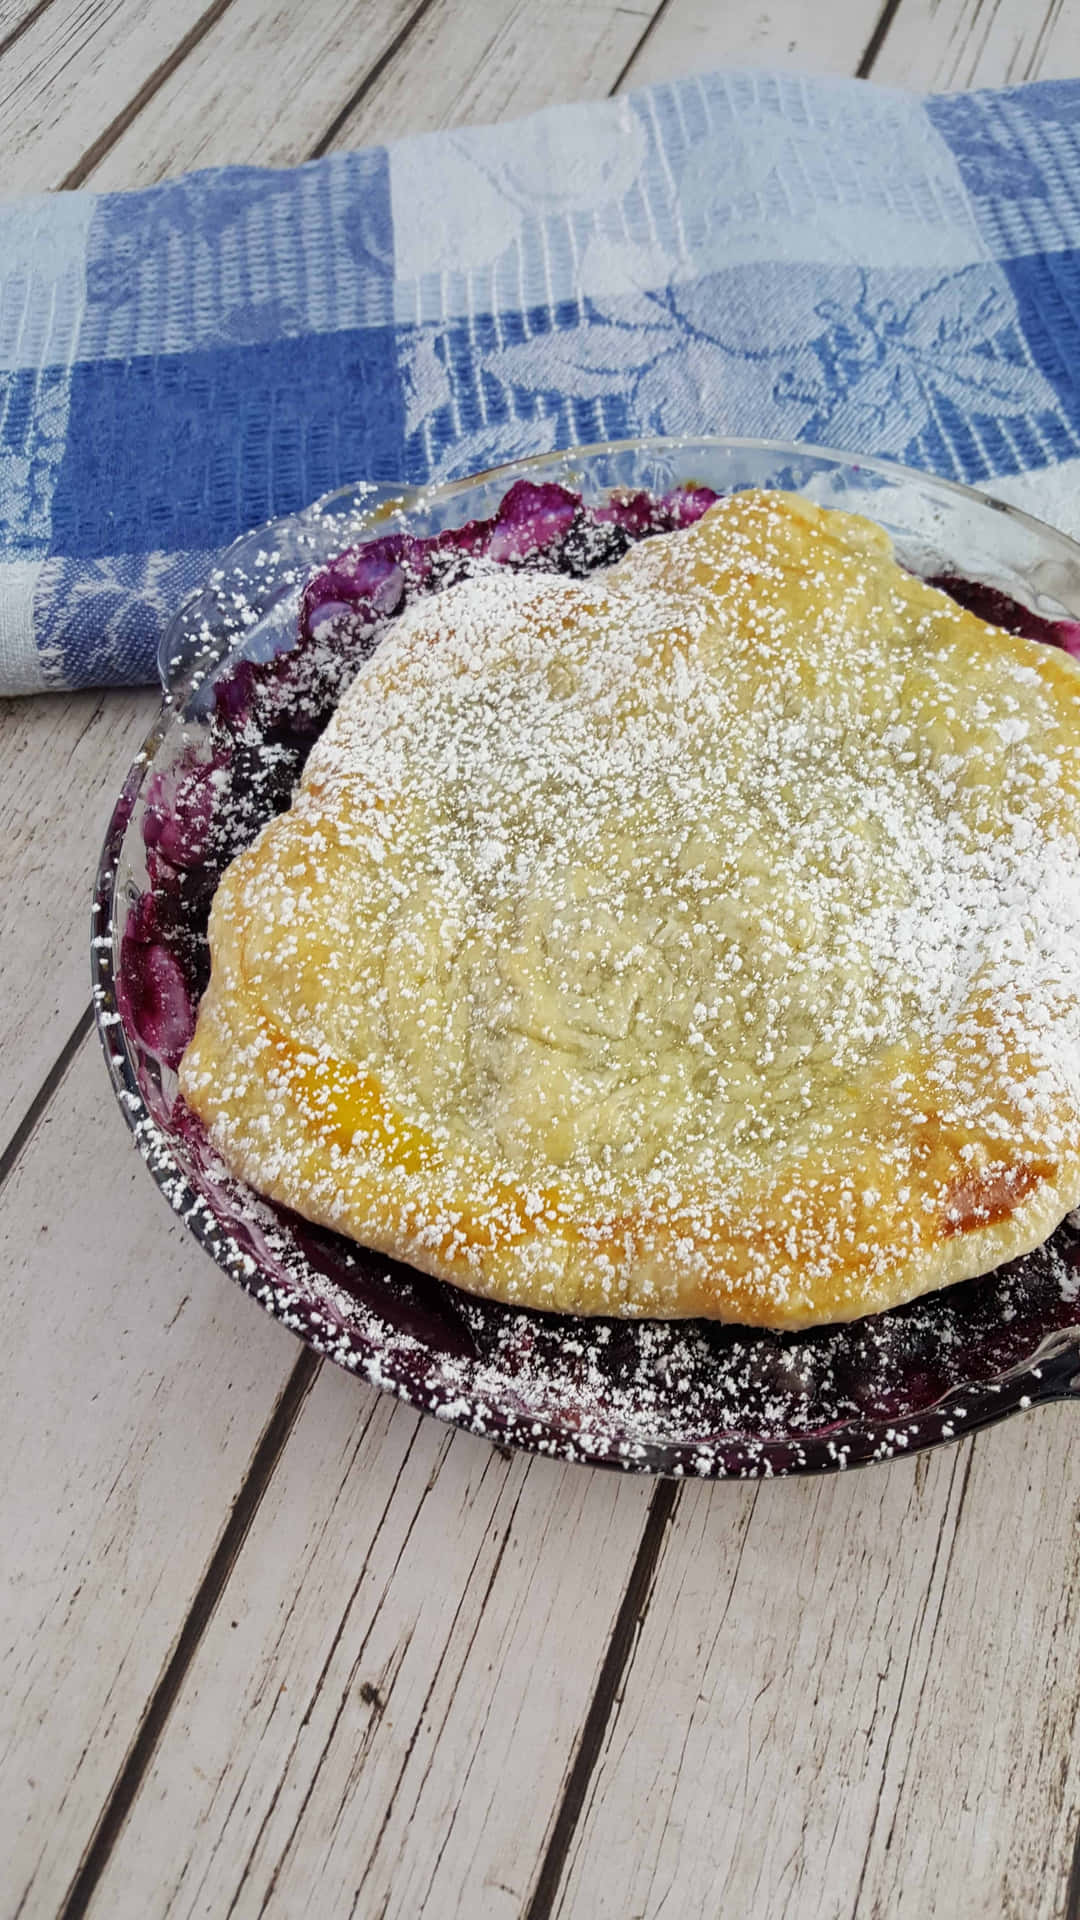 A fresh and delicious blueberries tart, ready to be devoured! Wallpaper